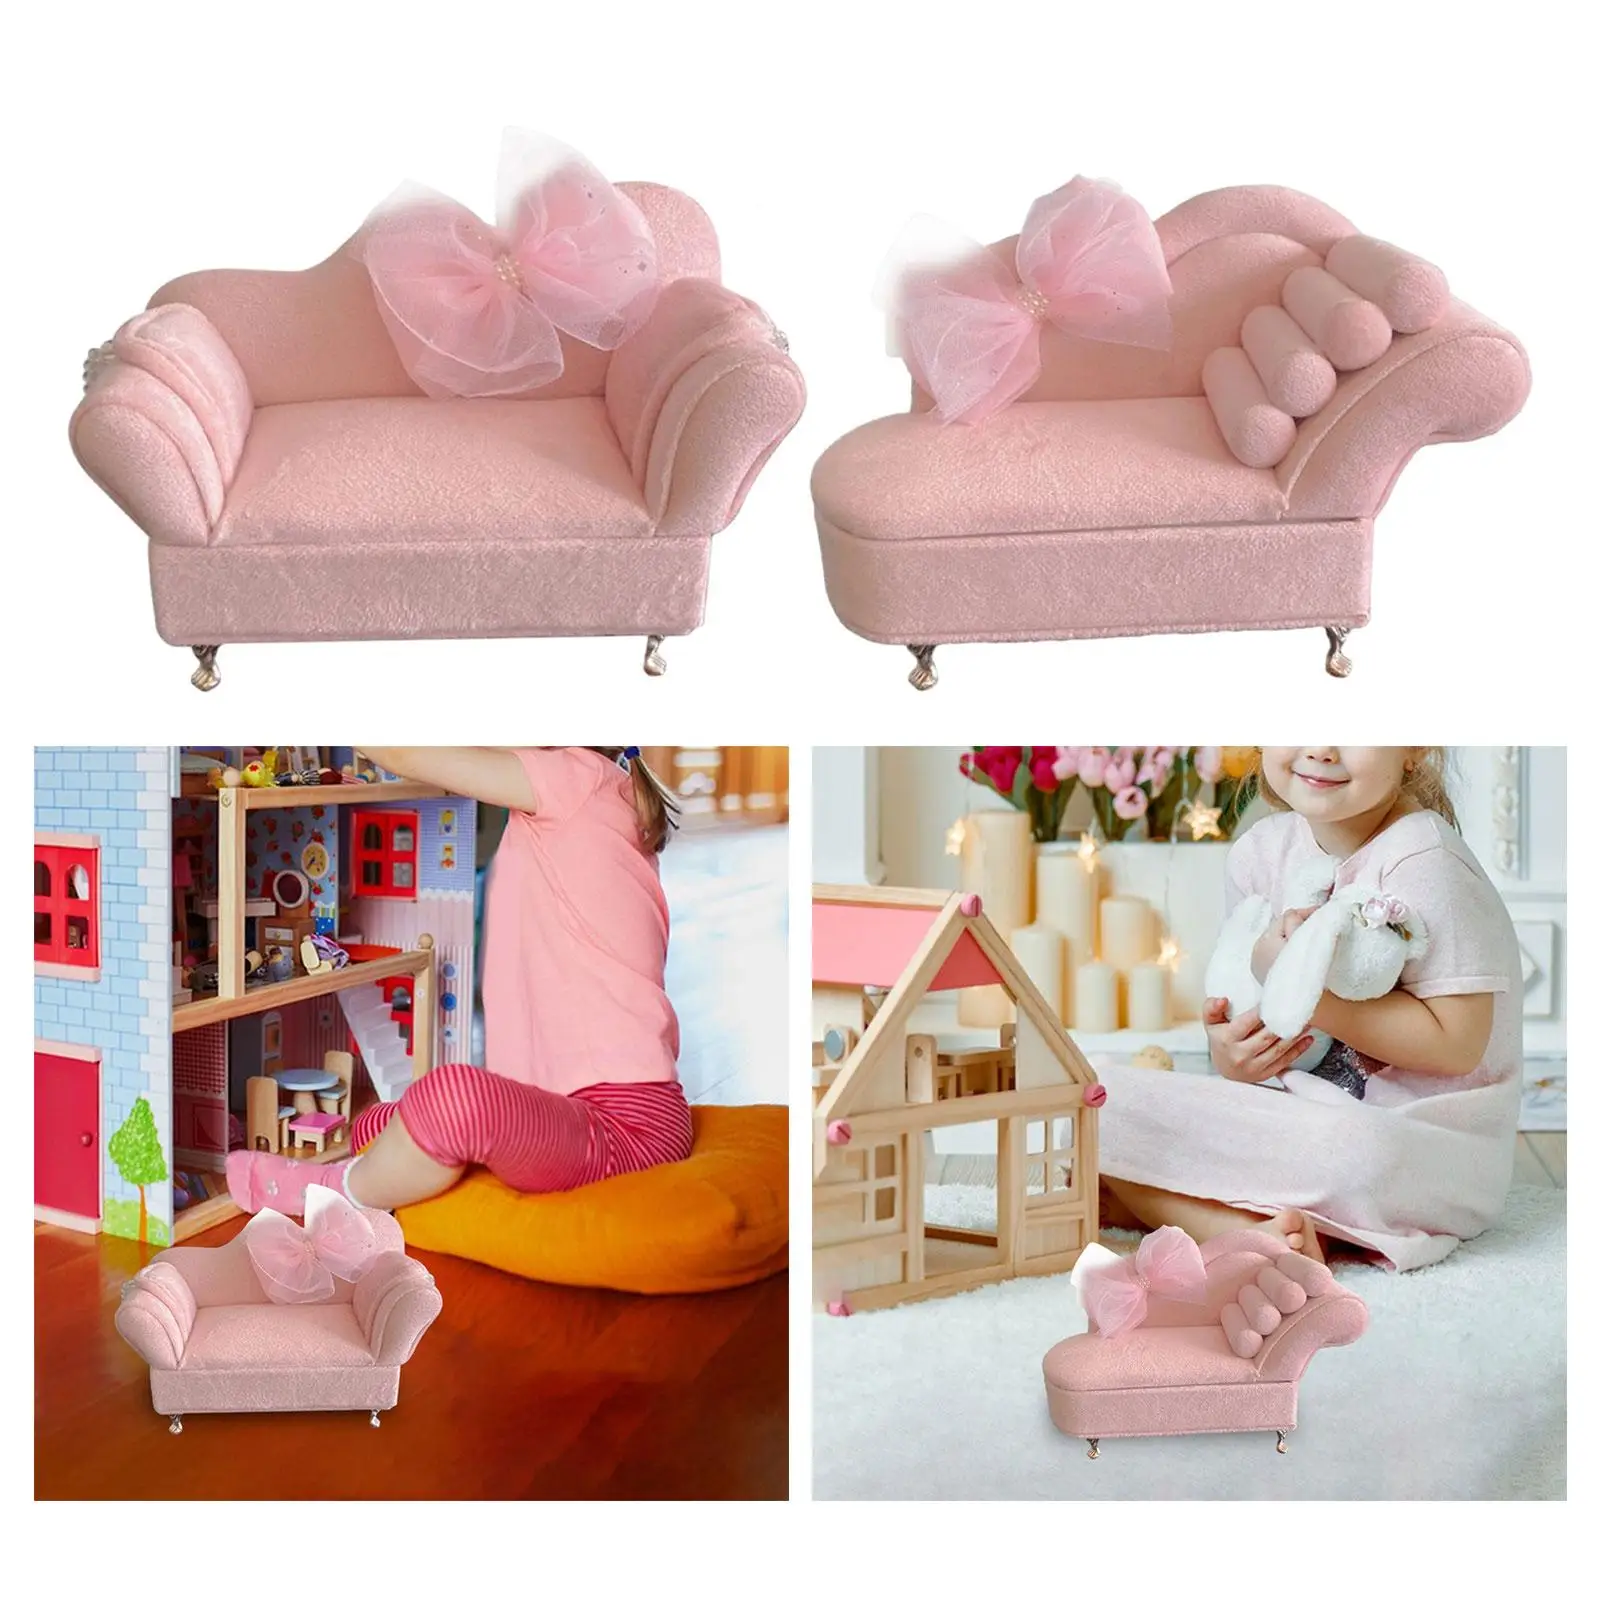 1/12 Sofa Living Room Ornaments Miniature Furniture Girls Women Jewelry Box Life Scene Supply for 6inch Dolls Figures Accs